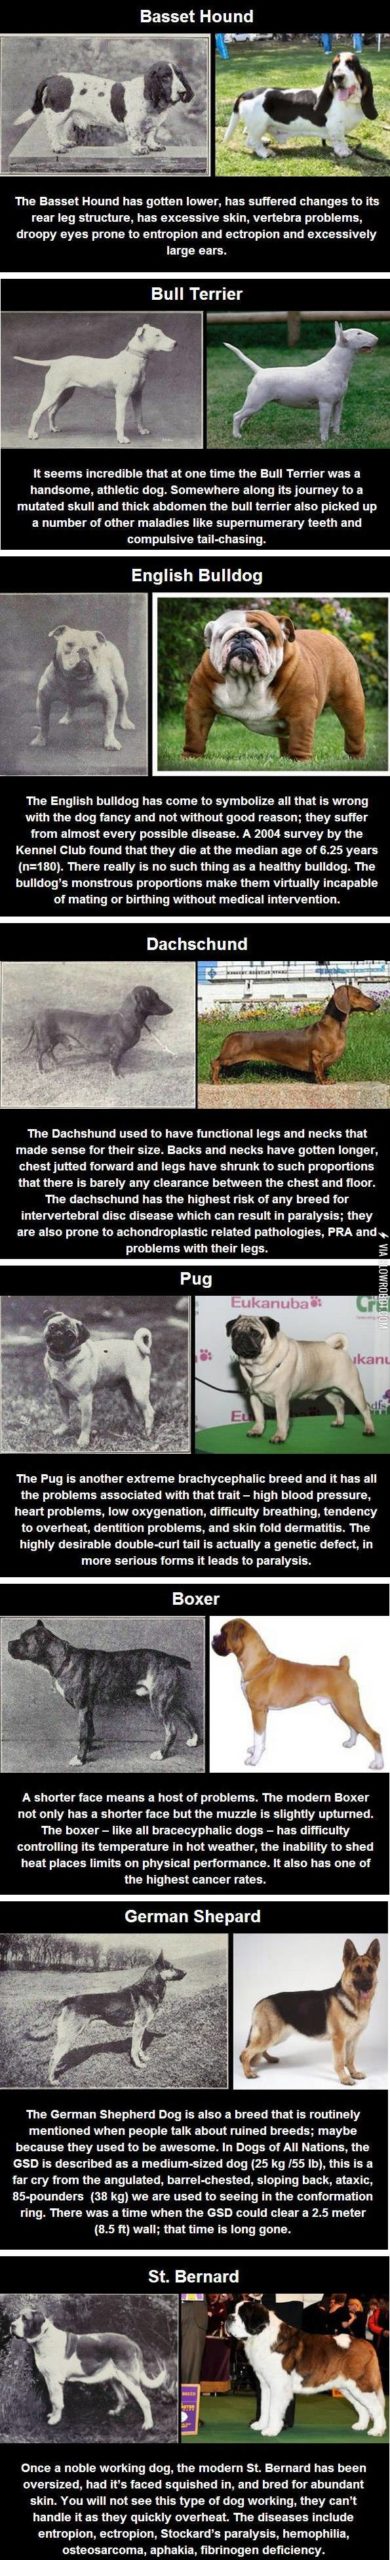 Dog+breed+changes+after+100+years+of+breeding.